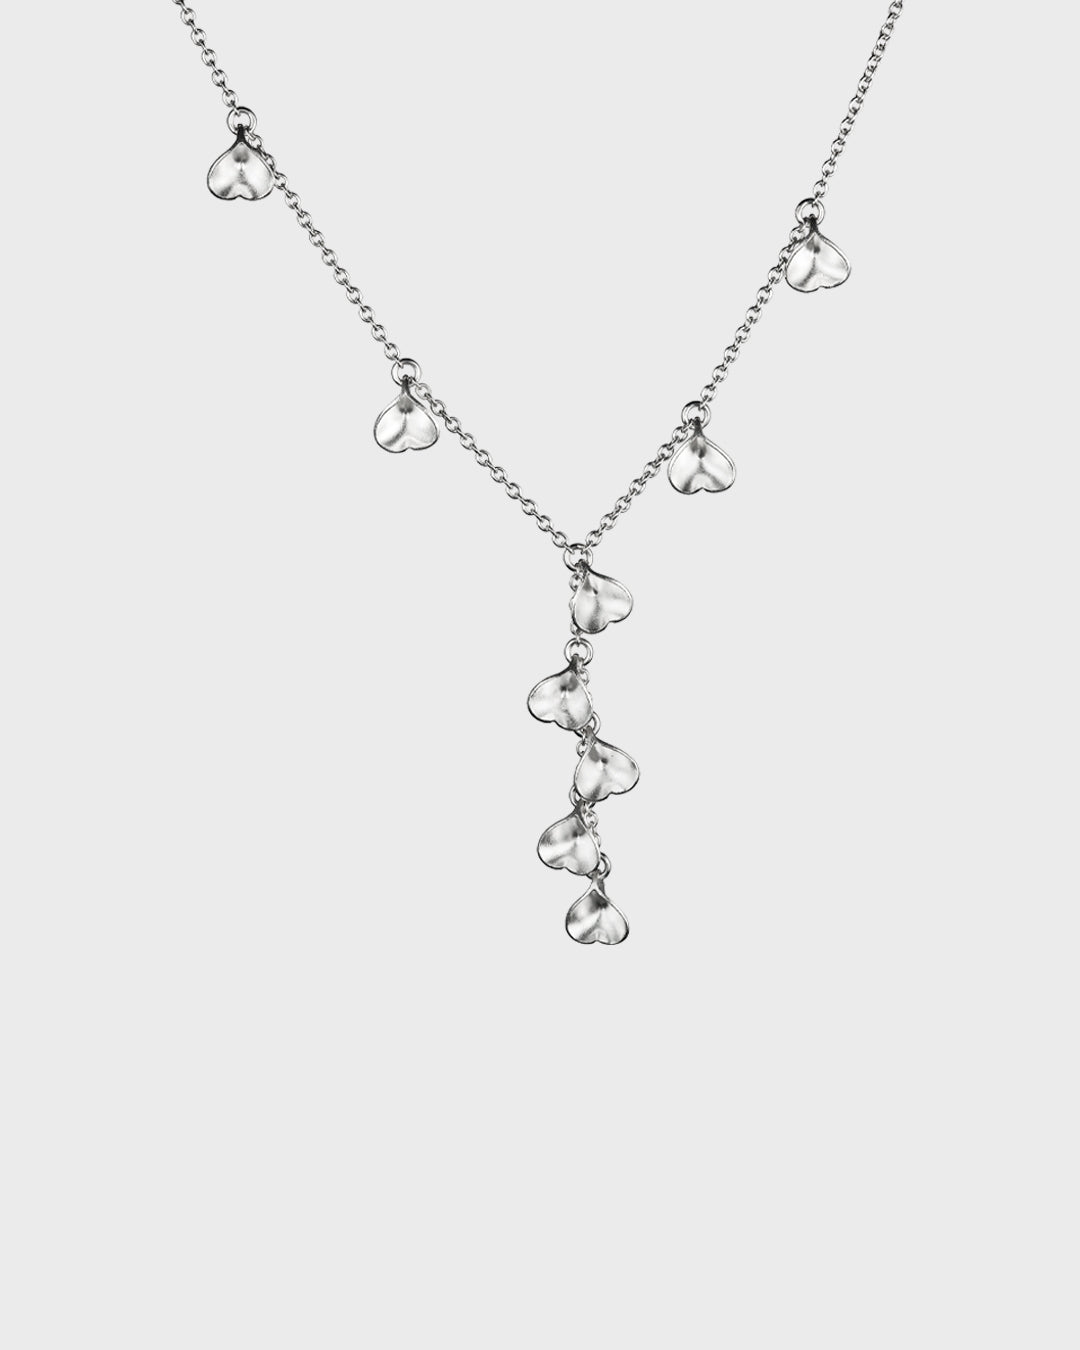 Made in Helsinki Eira Necklace